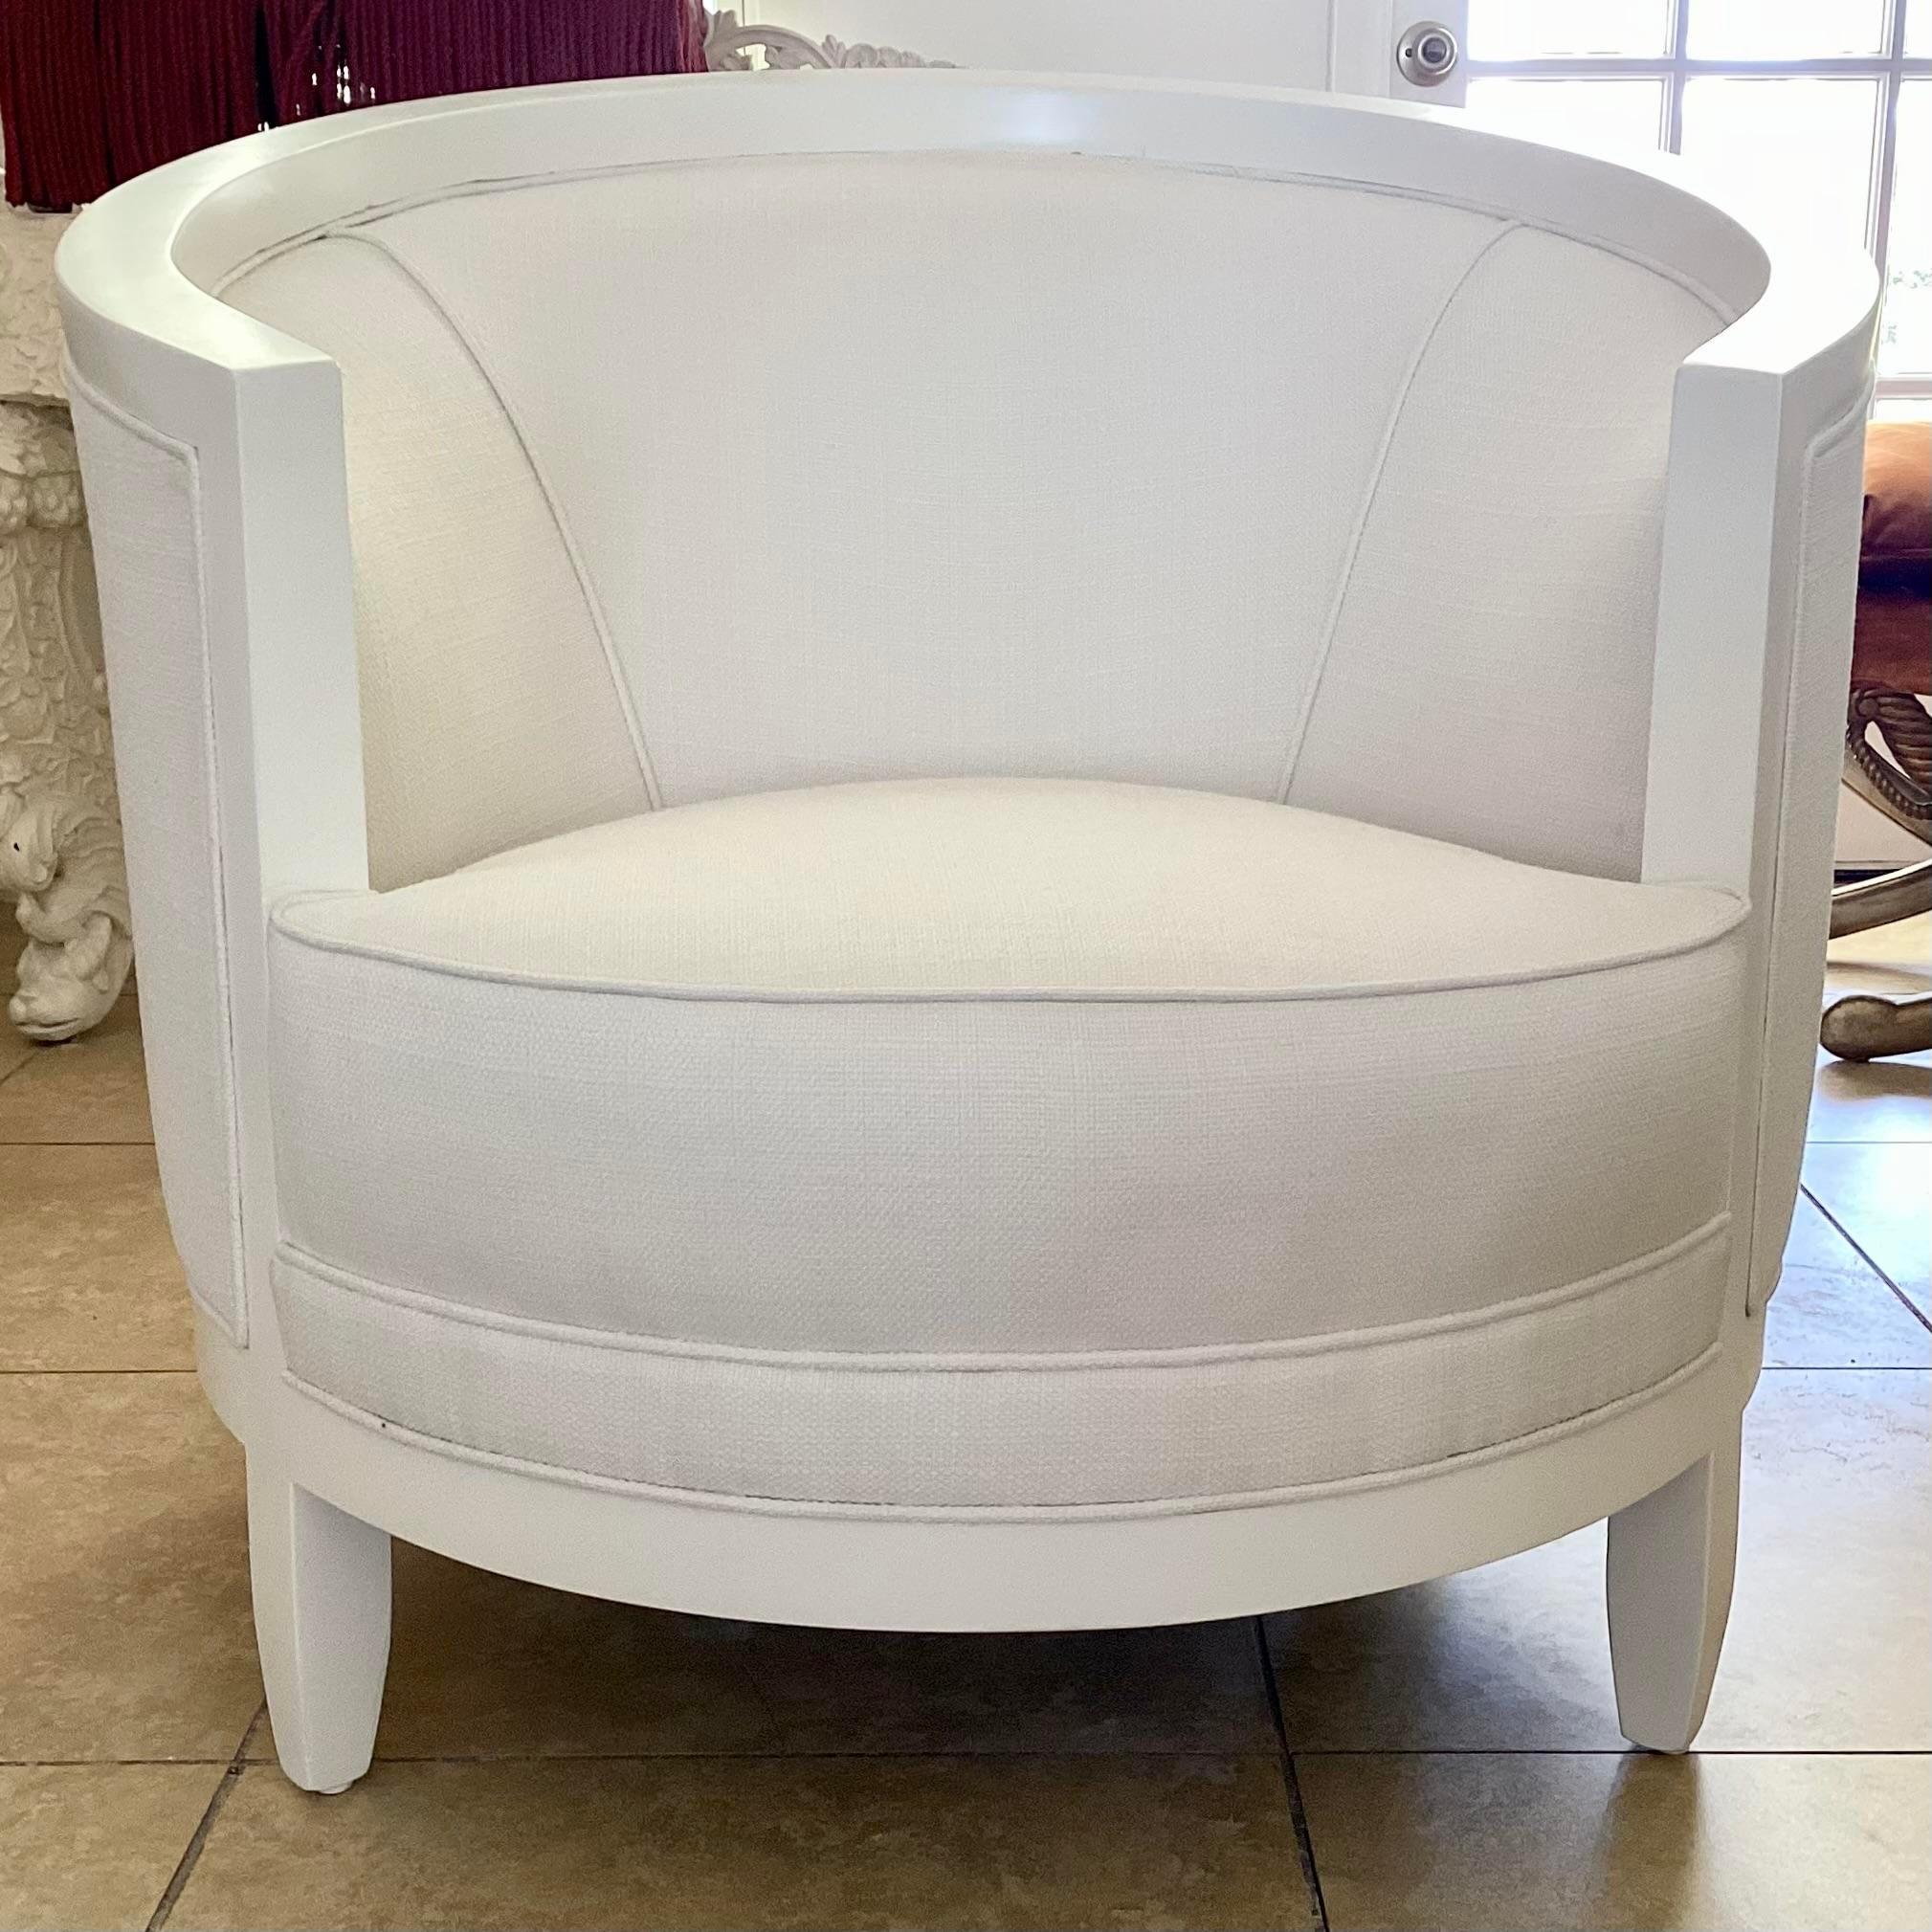 Todd Hase designed and manufactures Carmen Bergere in White lacquer and new Todd Hase High Performance off white textiles. Add some Hollywood Glam to your home. Nice Floor sample in showroom condition available for immediate delivery.